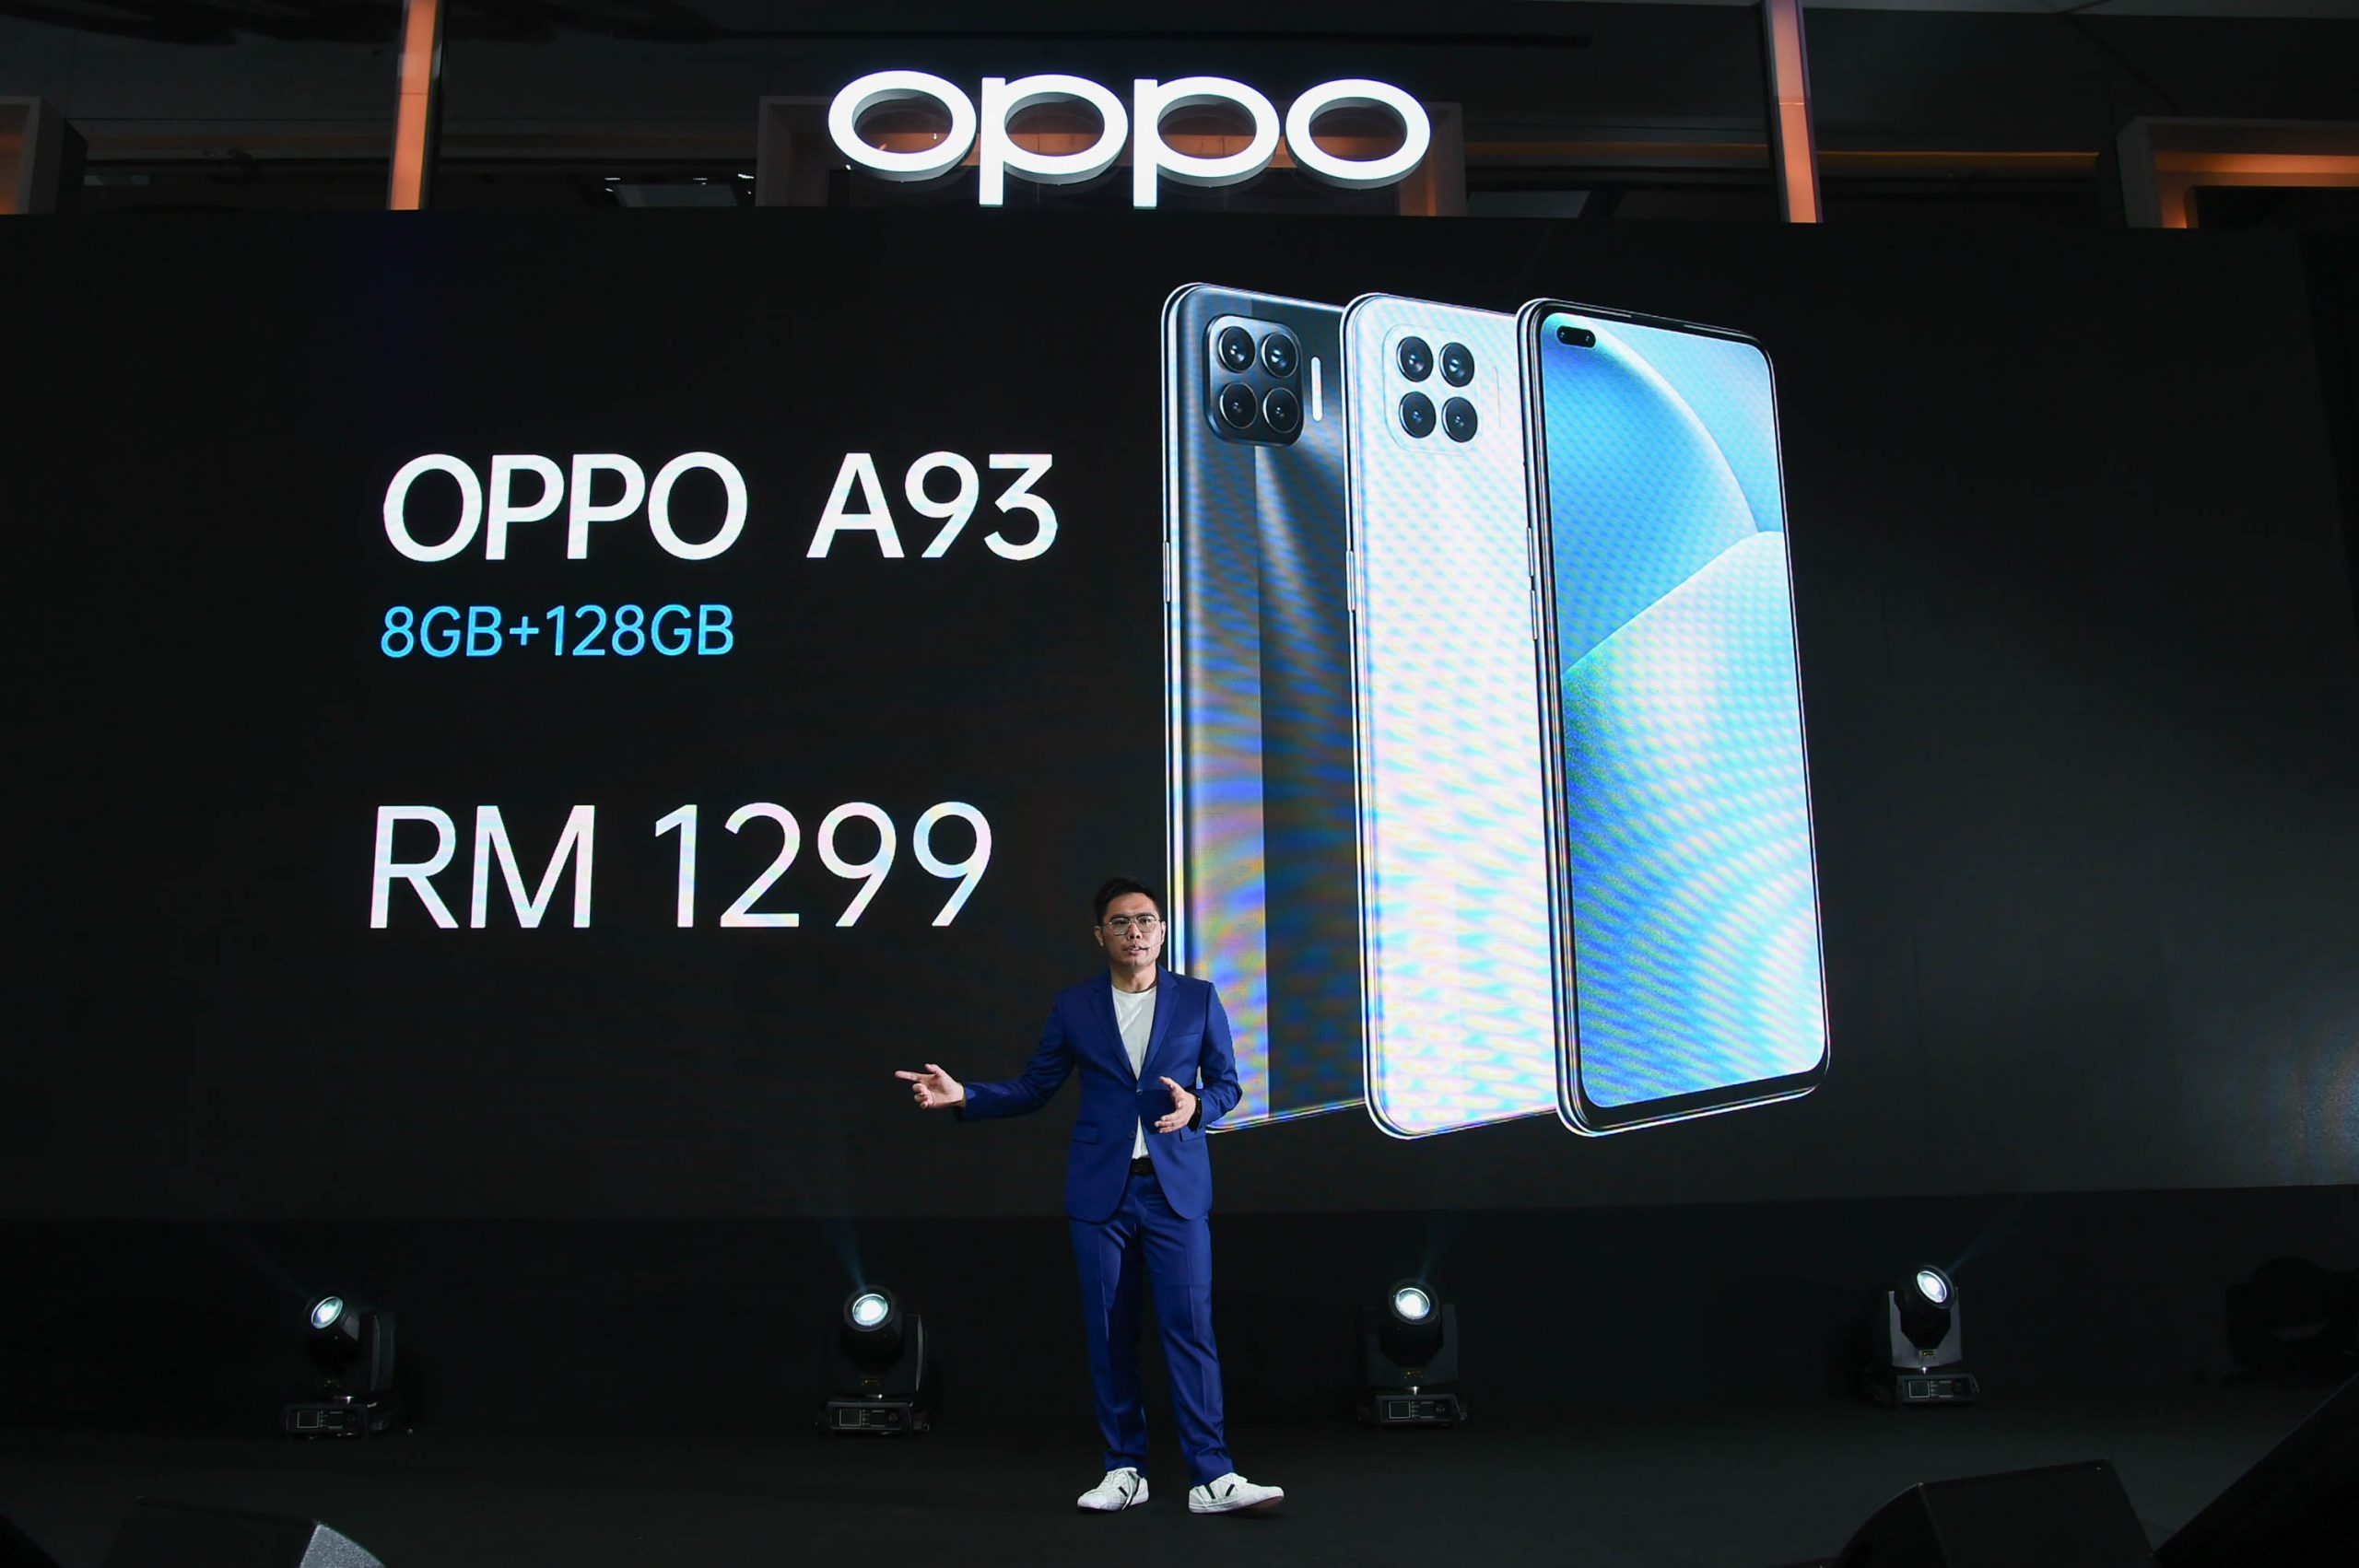 OPPO A93 price